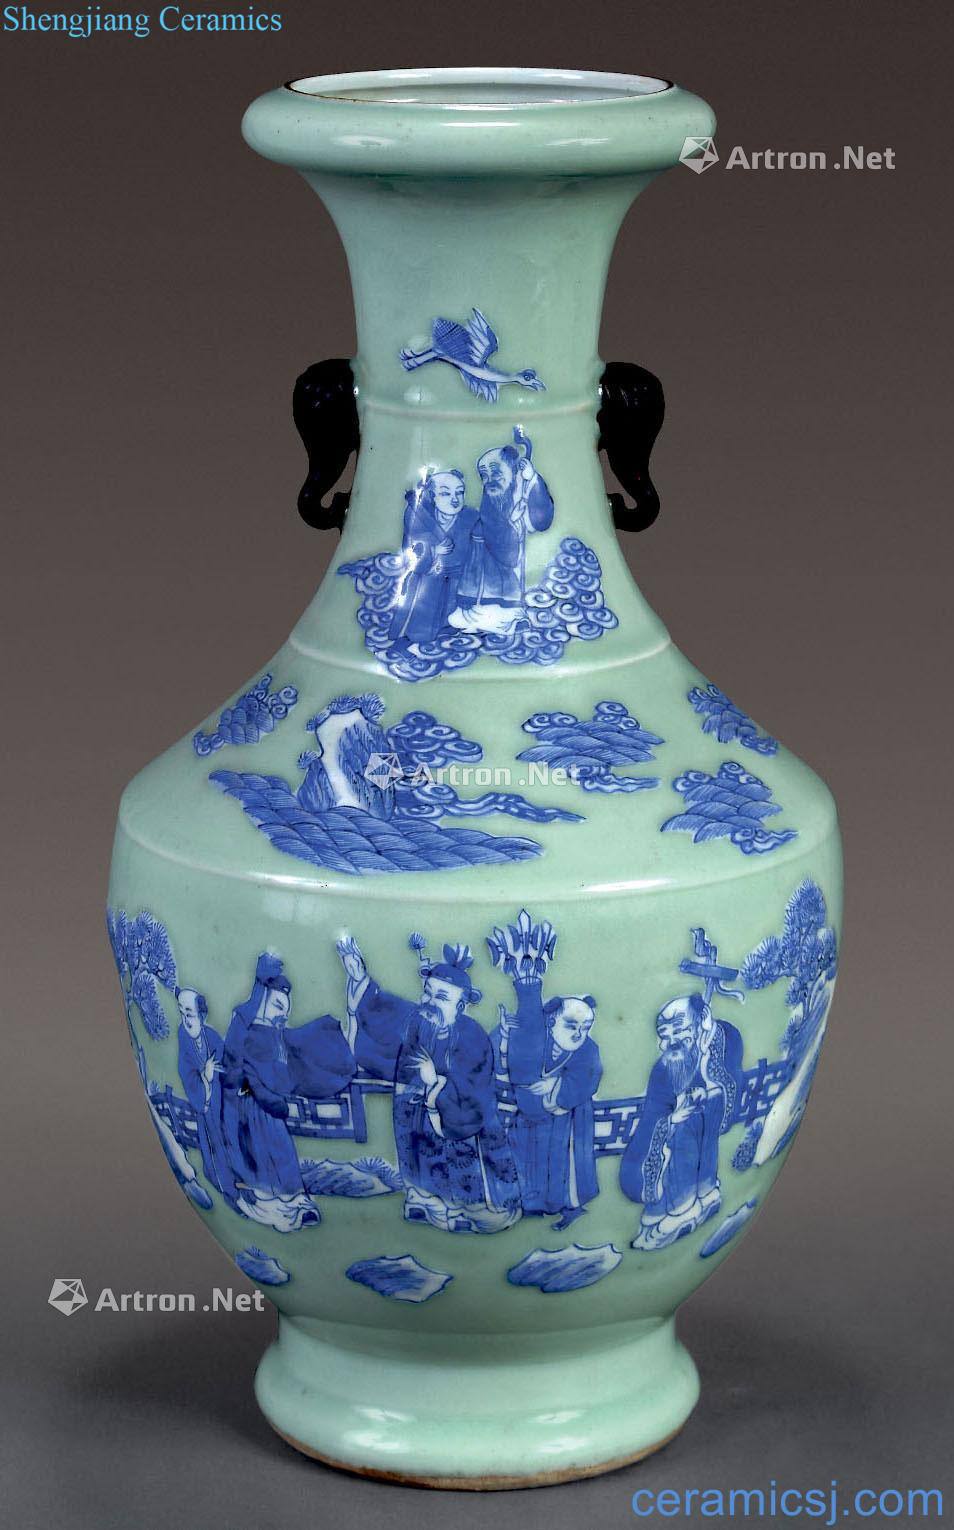 The pea green vase with a blue and white people object